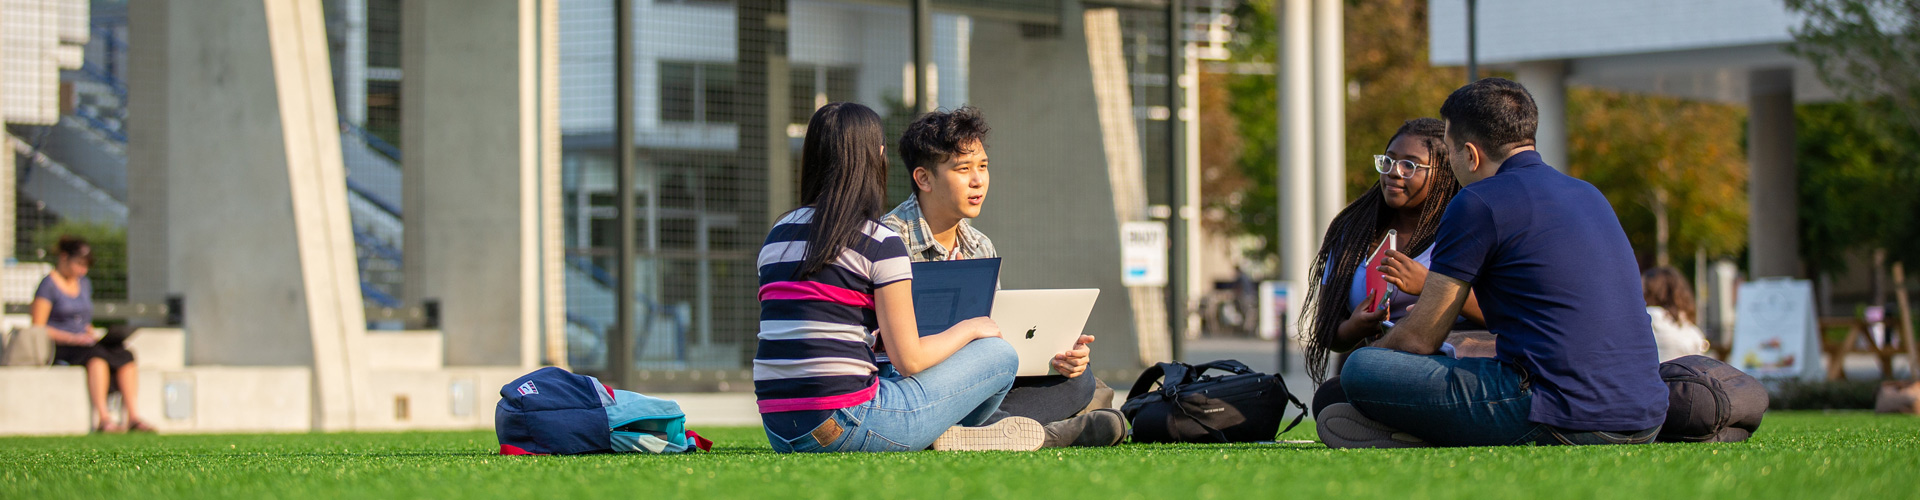 four students sitting outside on grass chatting holding laptops